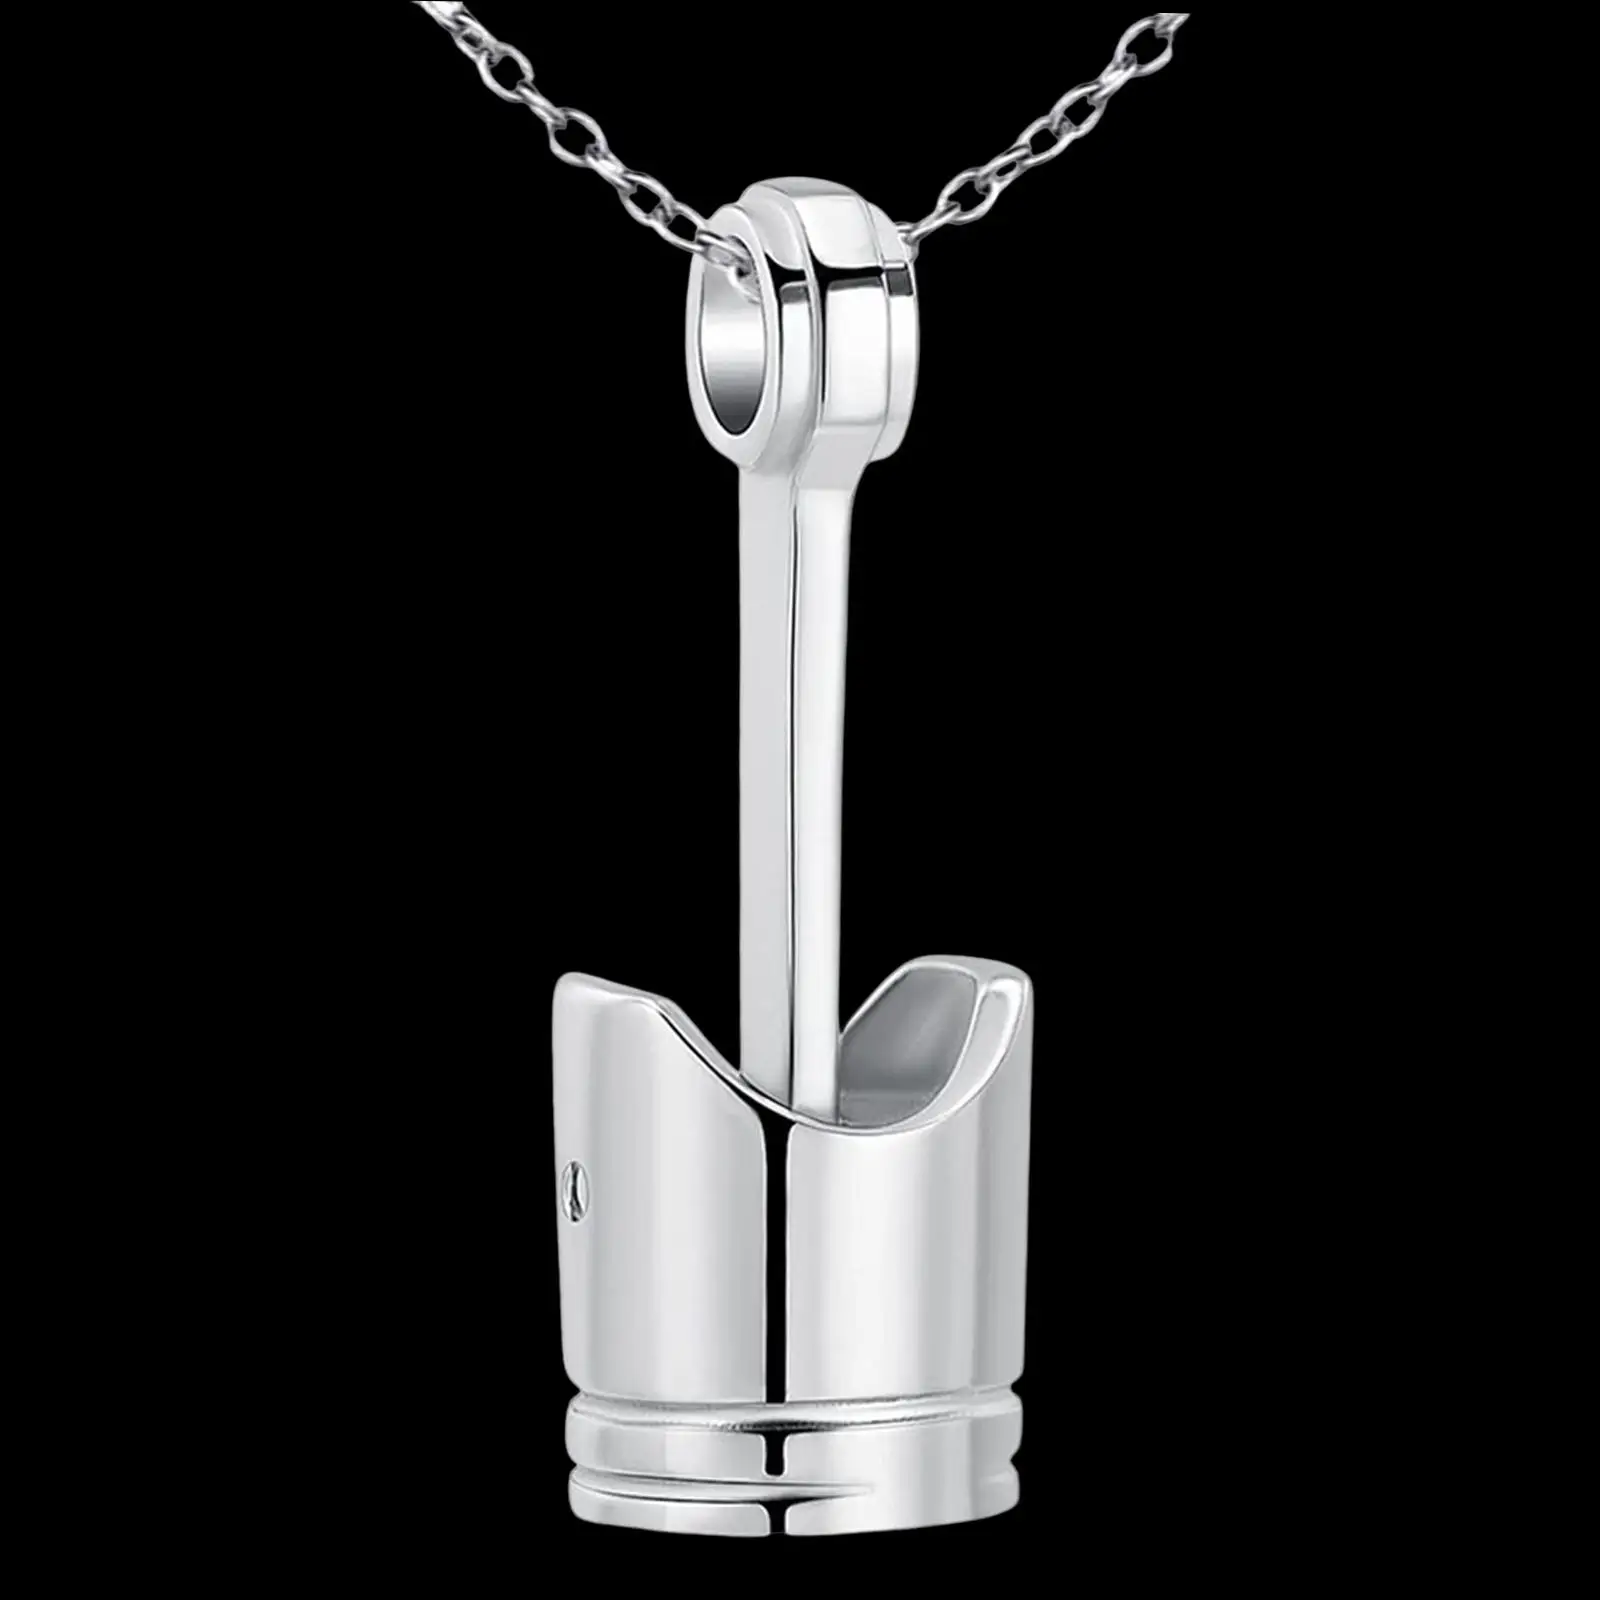 Cremation Urn Necklace Exquisite Pendant Stainless Steel Jewelry for Friends Pet